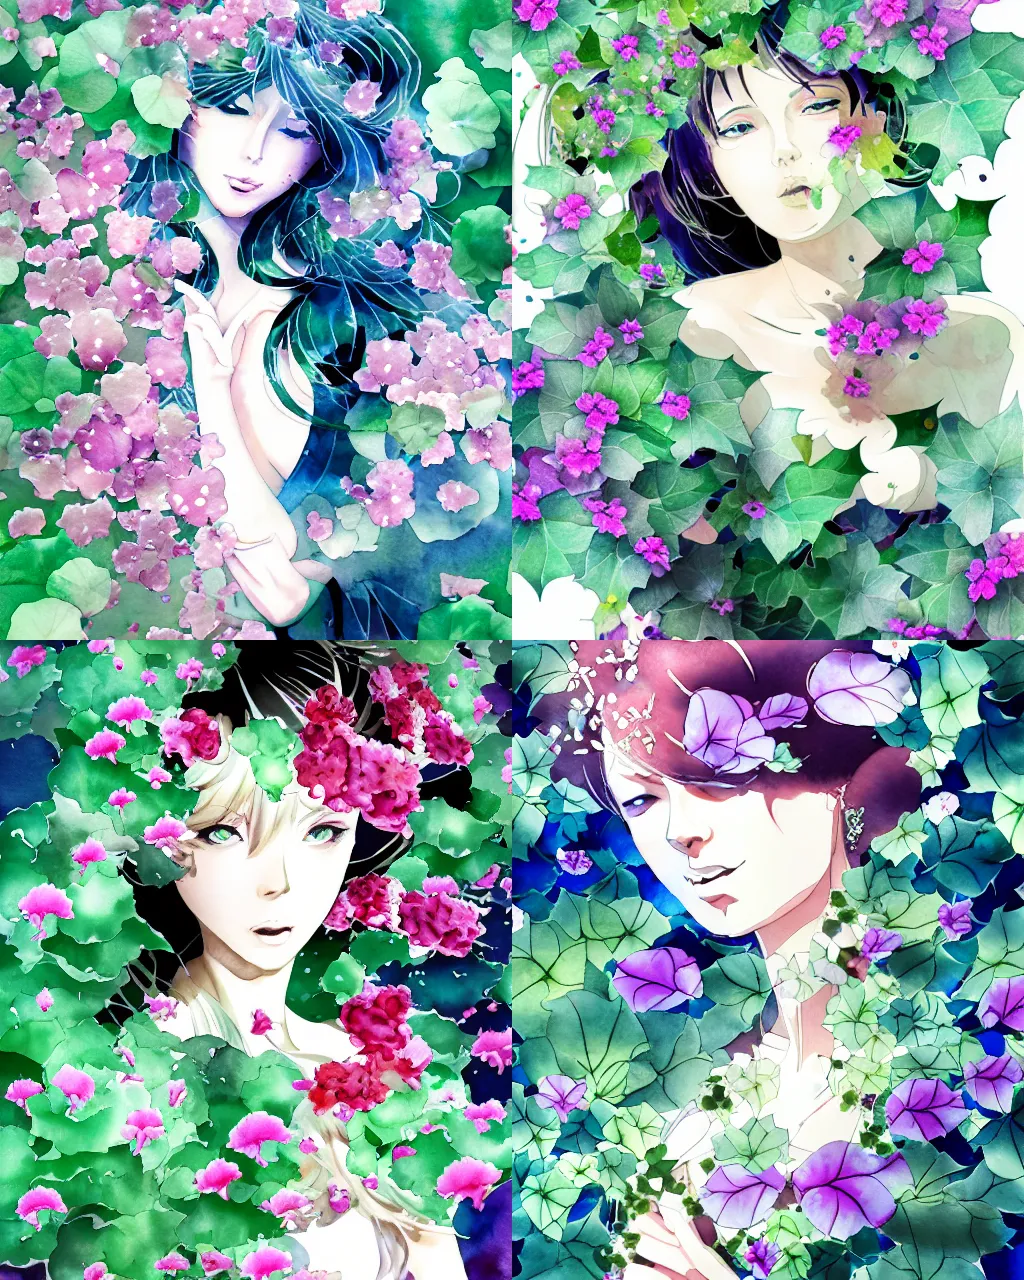 Prompt: Ivy florid beauty in a whirlwind of petals, argerm and wlop and leiji matsumoto, watercolor double exposure